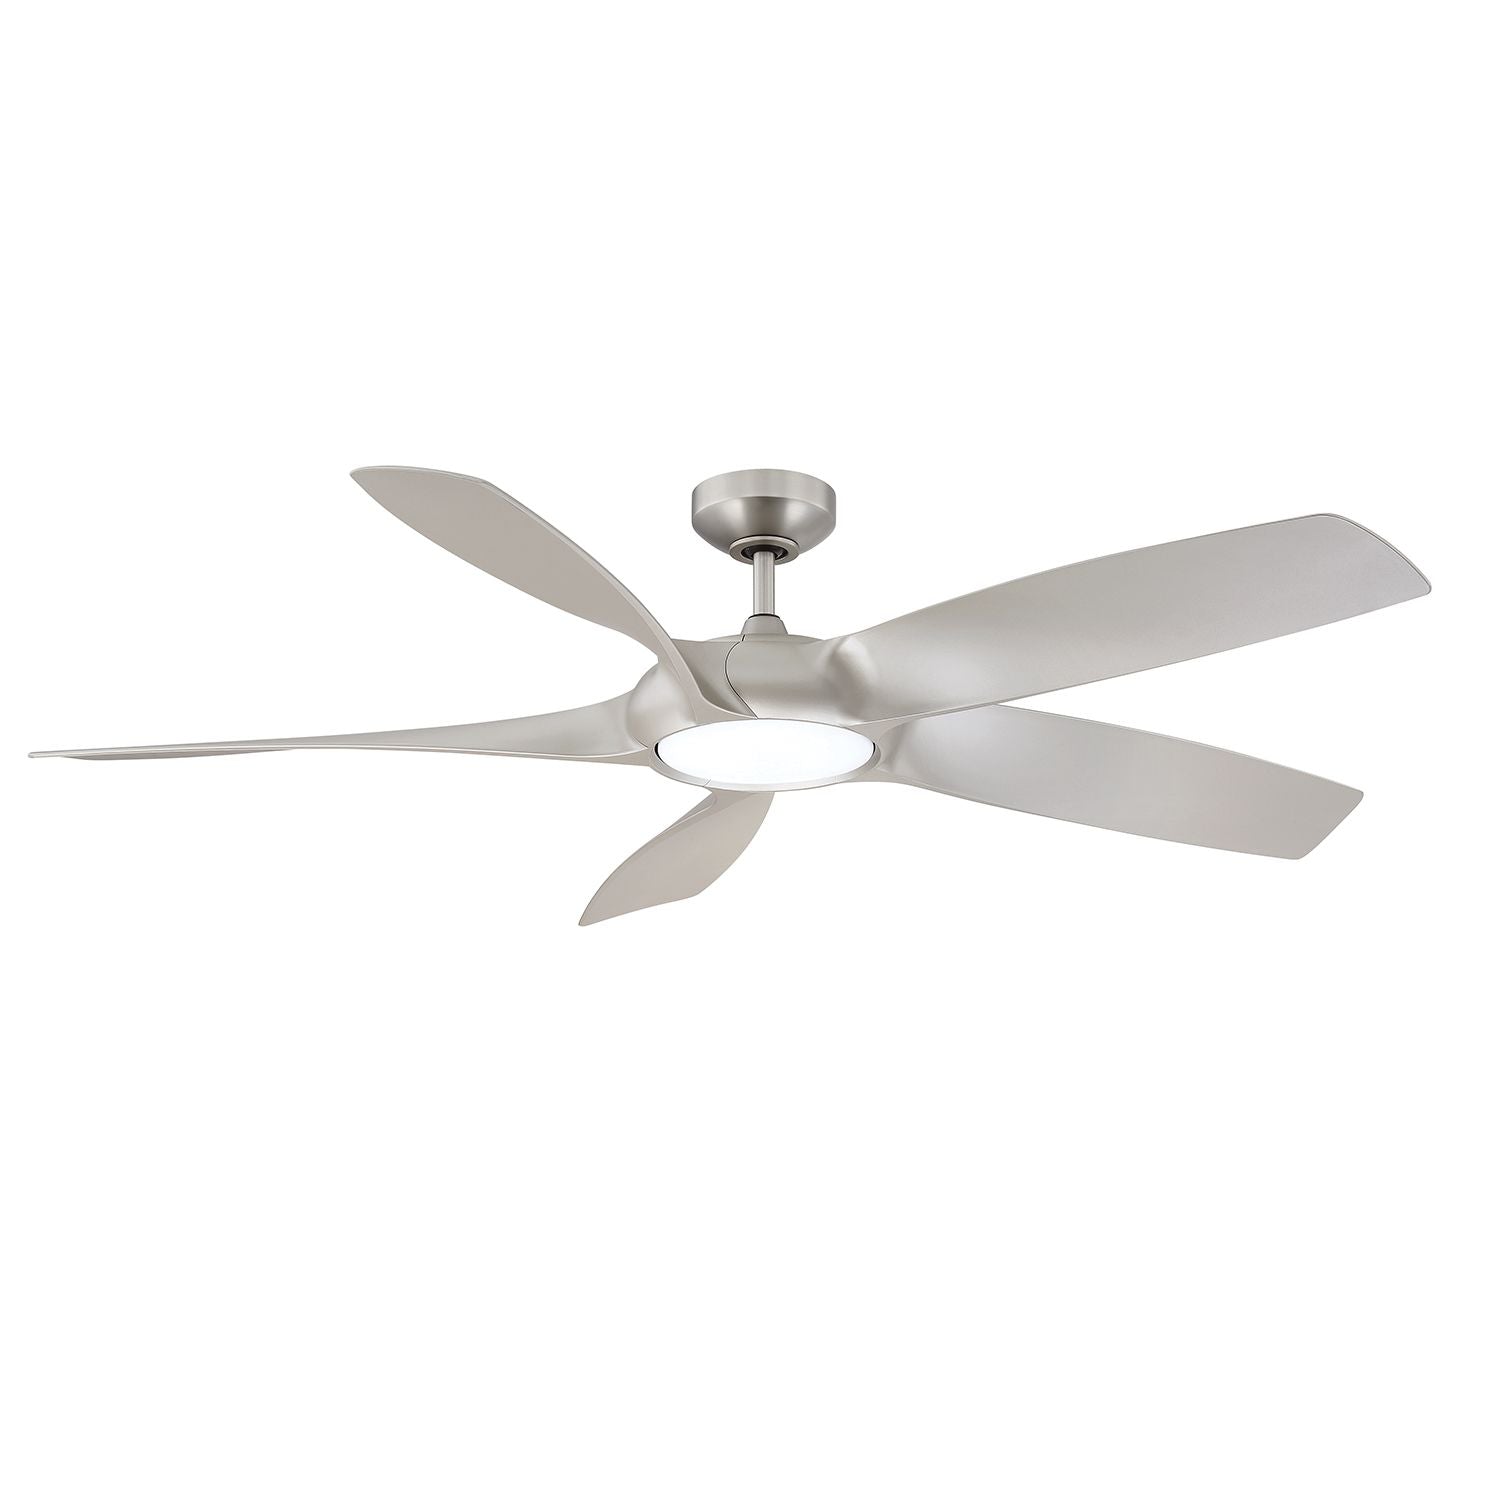 Blade Runner Ceiling Fan Satin Nickel with matching blades